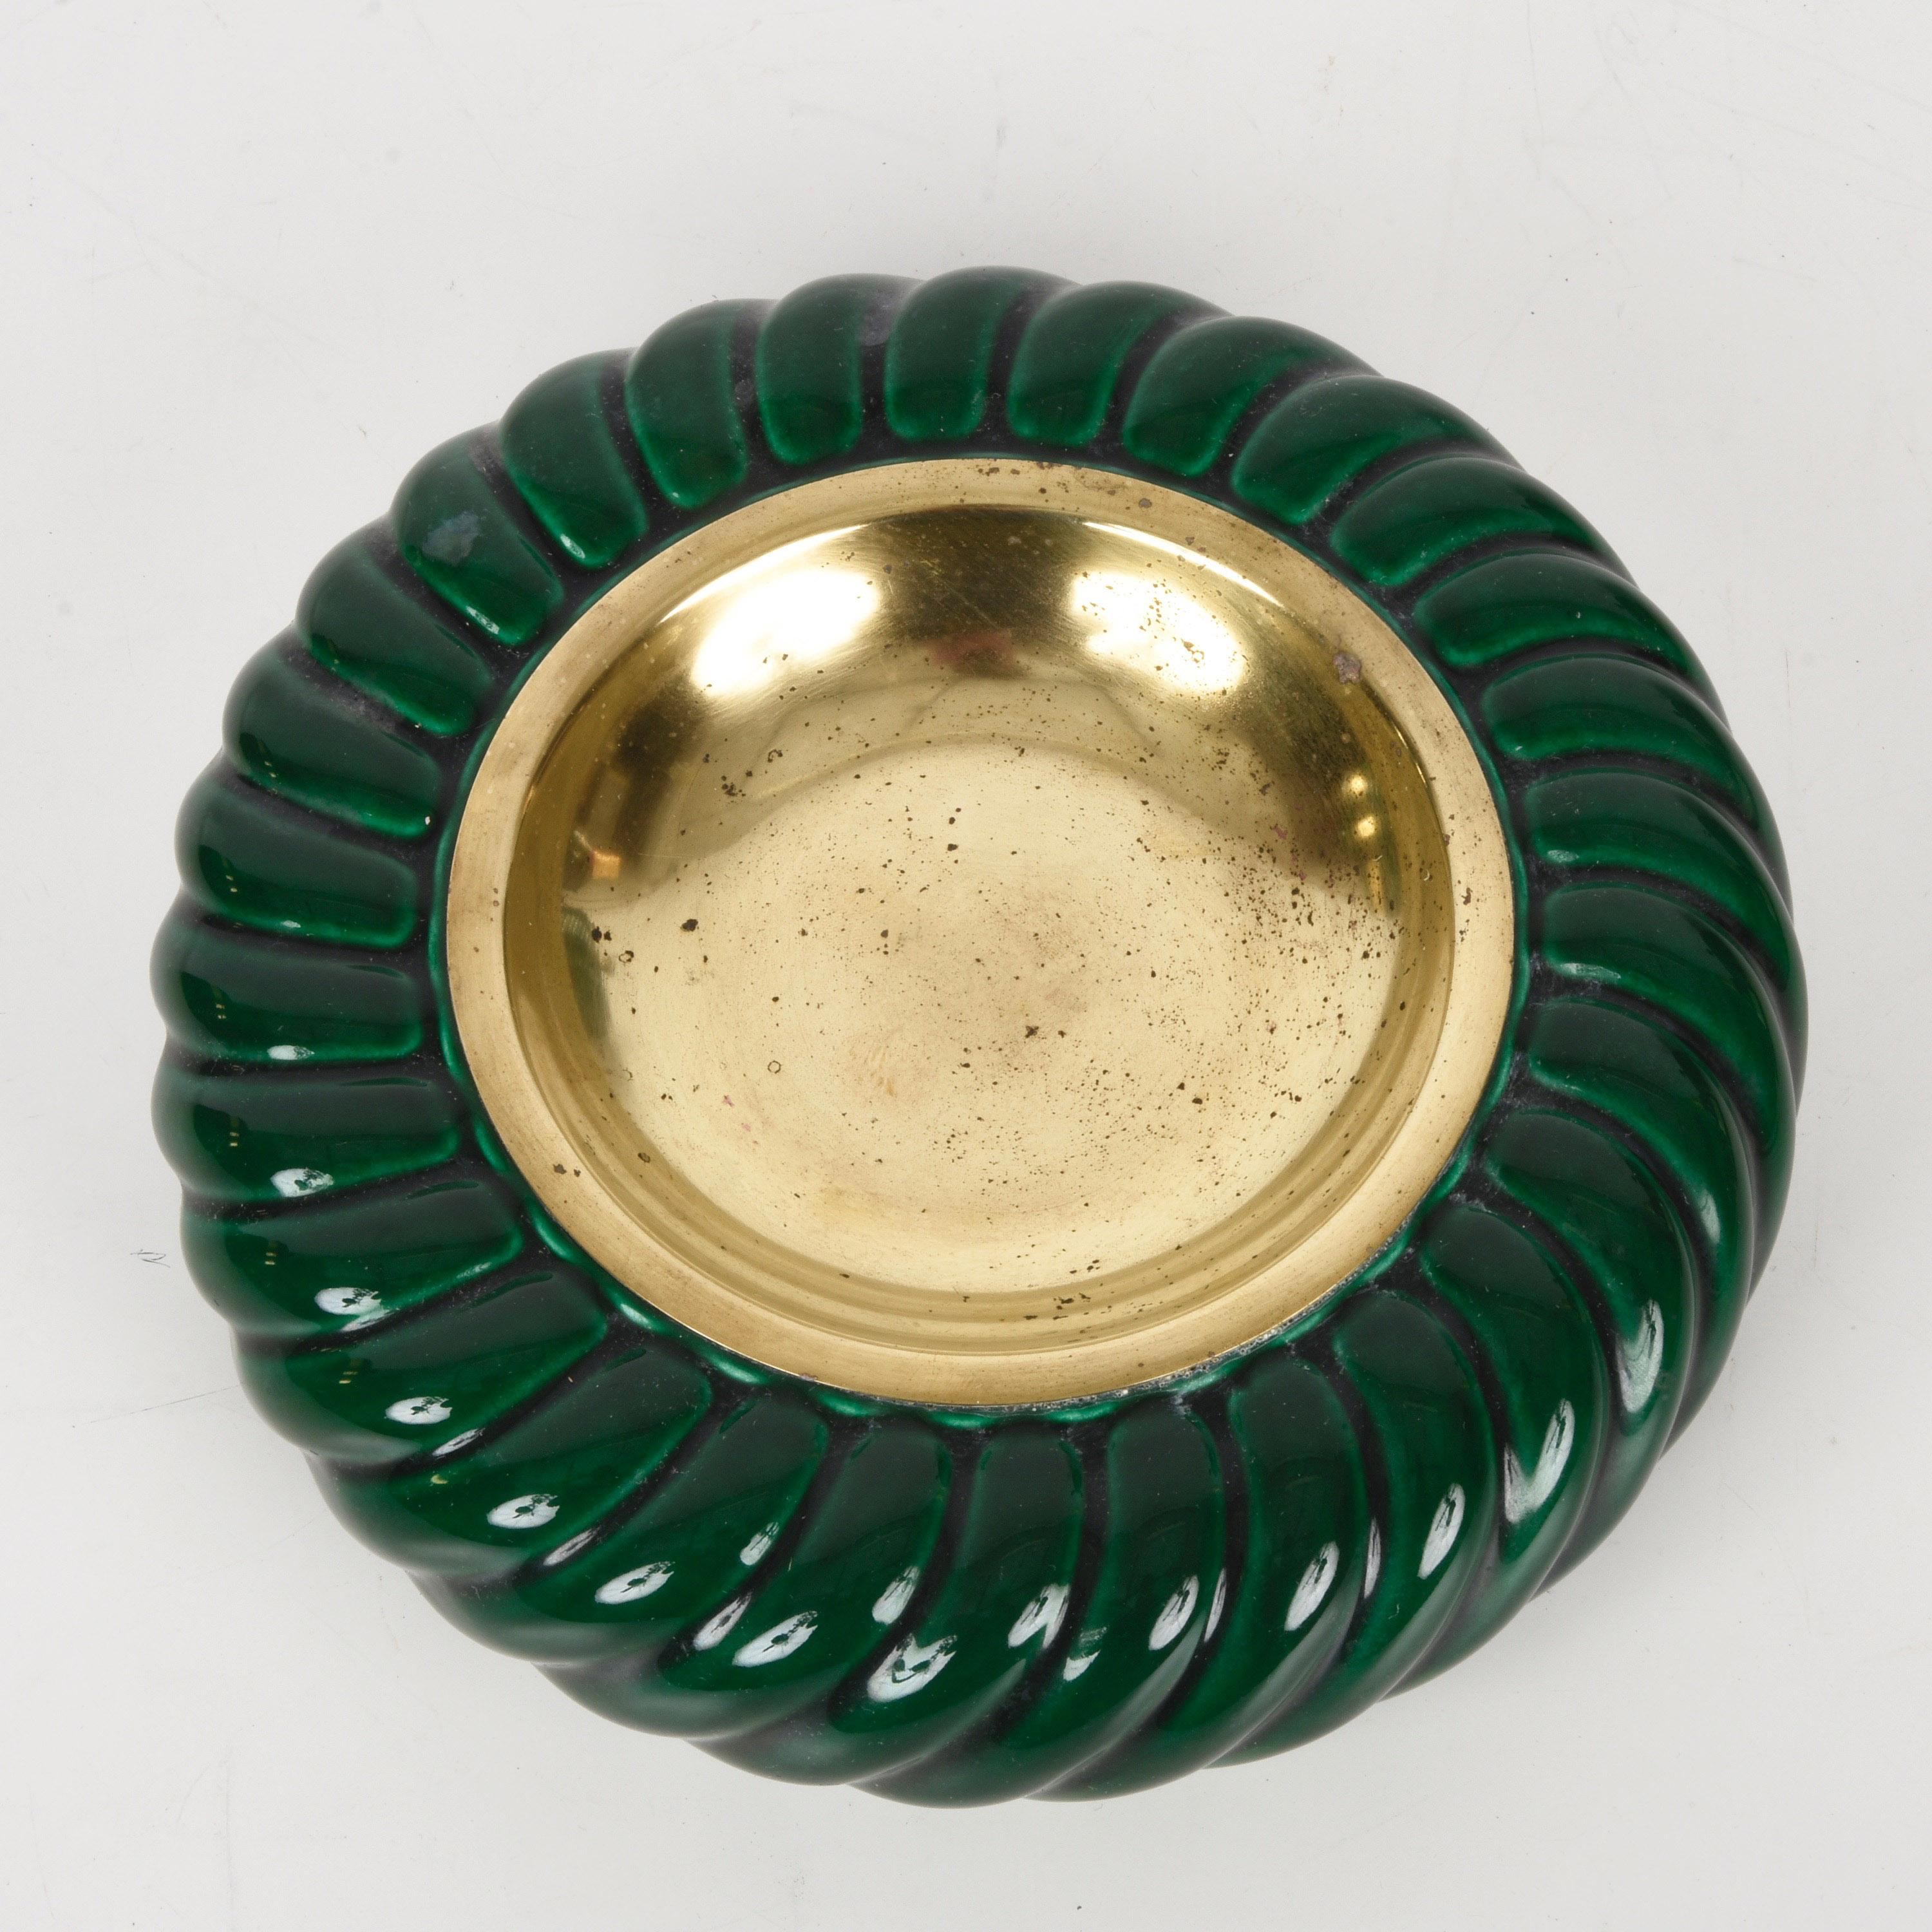 Amazing Mid-Century Modern green ceramic and brass ashtray. This fantastic piece was designed by Tommaso Barbi and produced by B. Ceramiche during the late 1960s in Italy.

The brand of the manufacturer is at the bottom part of the item while on